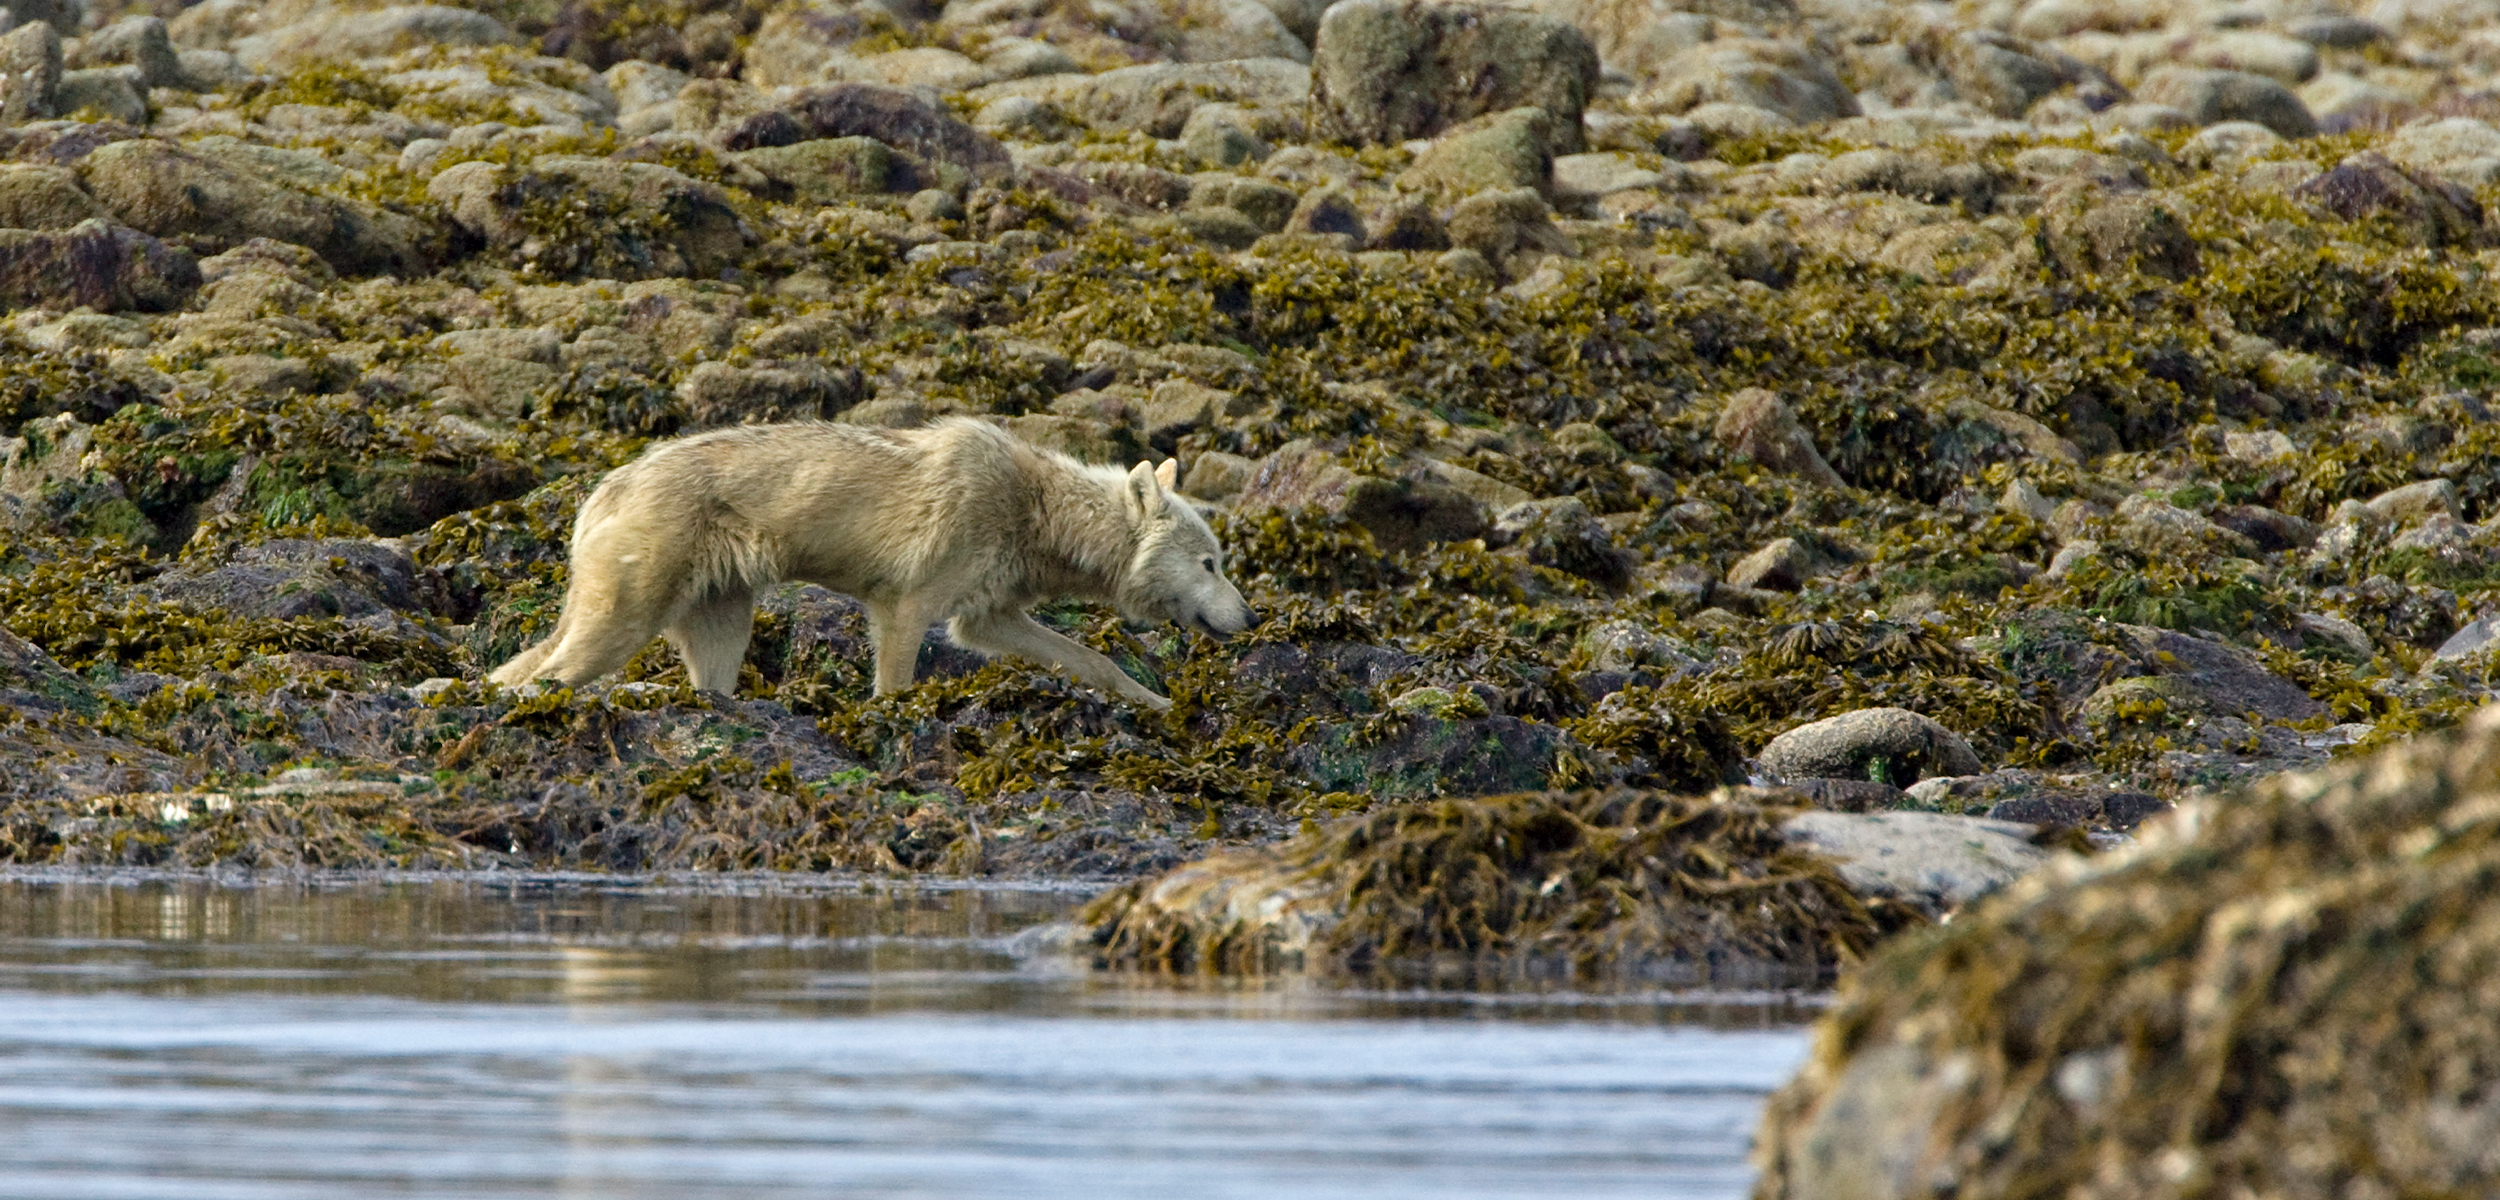 A small grey wolf in the center of the photo sulks through the green seaweed filled intertidal zone. The bottom of the photo has the ocean.